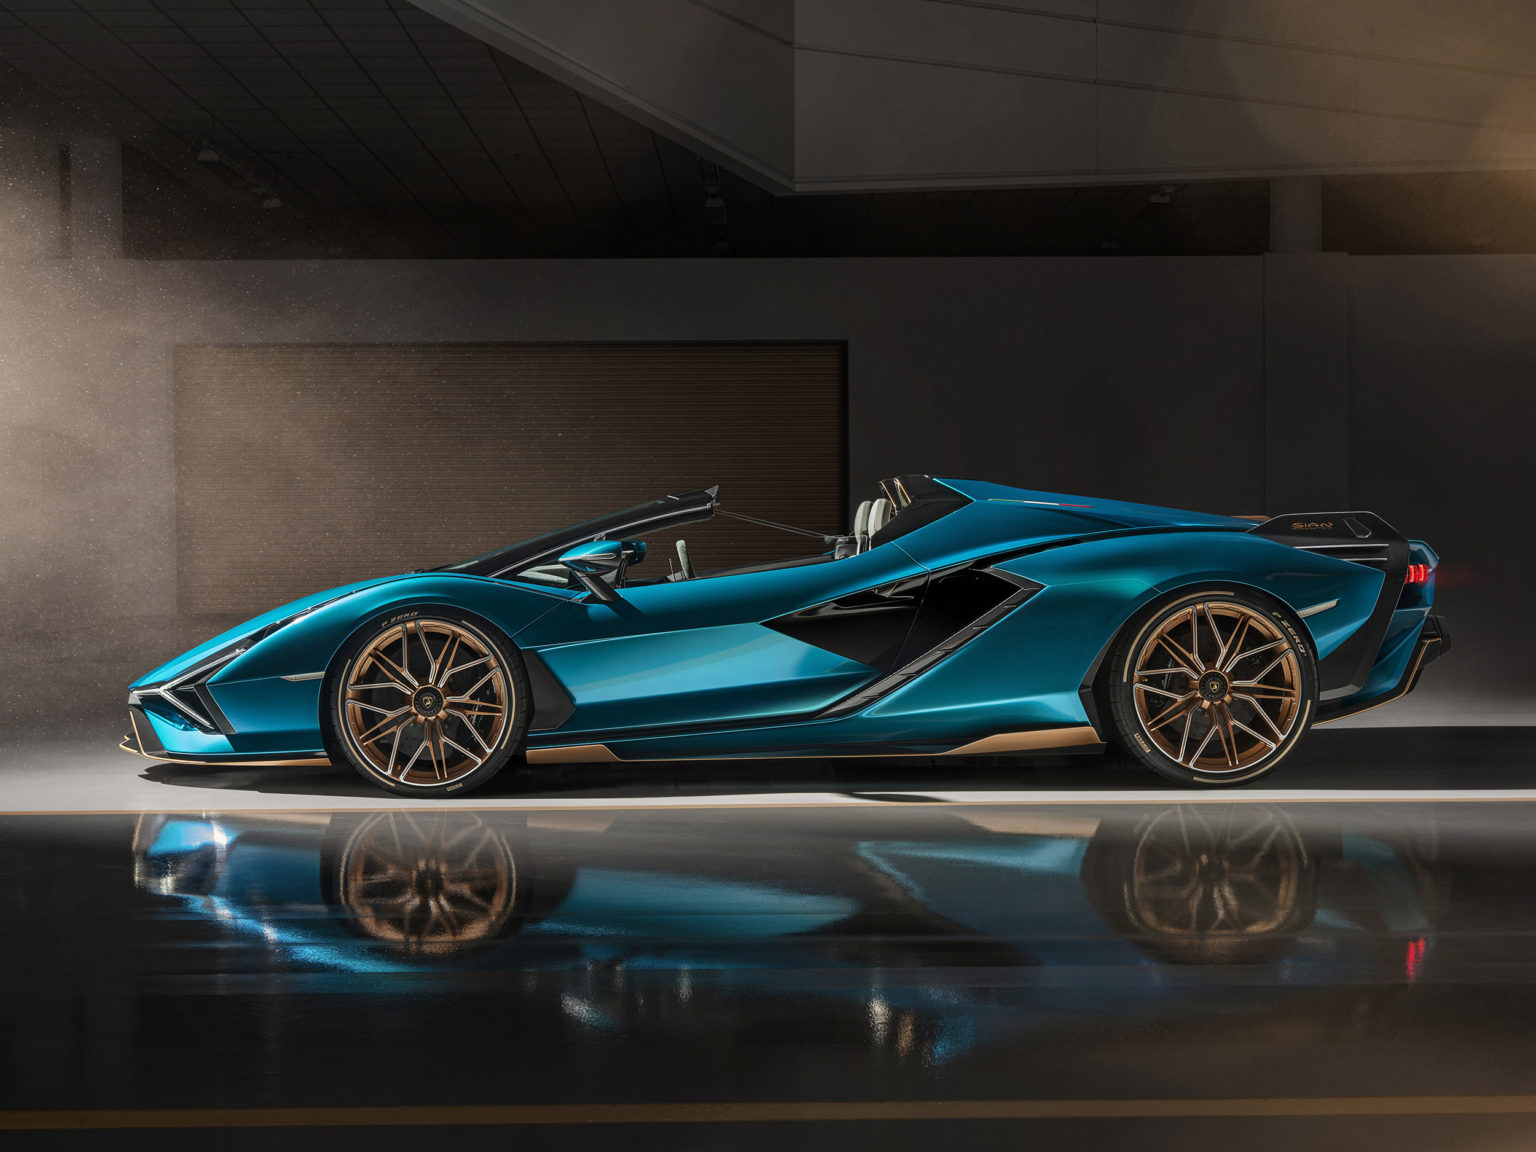 The 2021 Lamborghini Sián Roadster is already sold out.